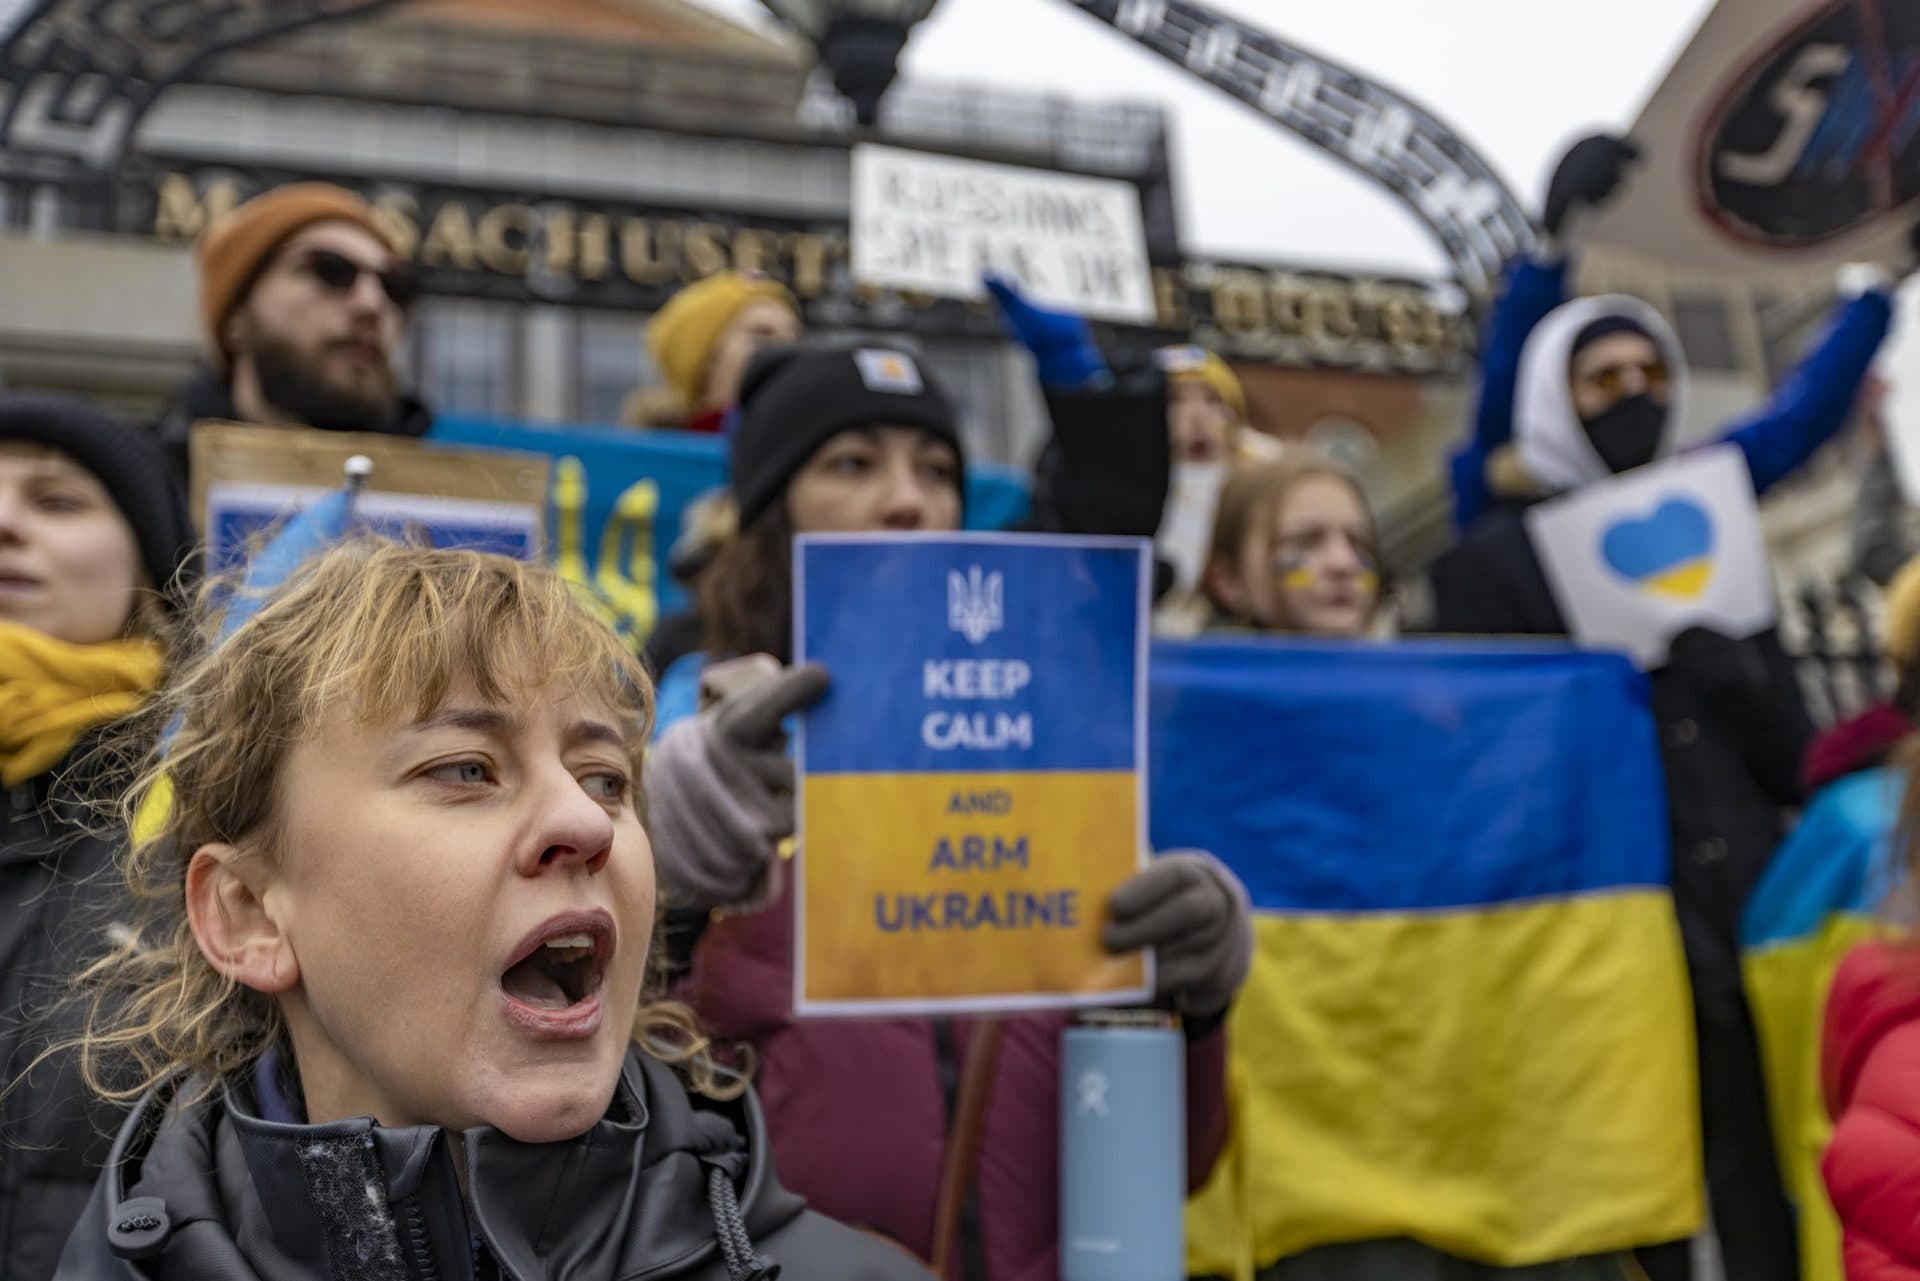 About a hundred people gathered and chanted in front of the State House for a rally to support Ukraine. (Jesse Costa/WBUR)